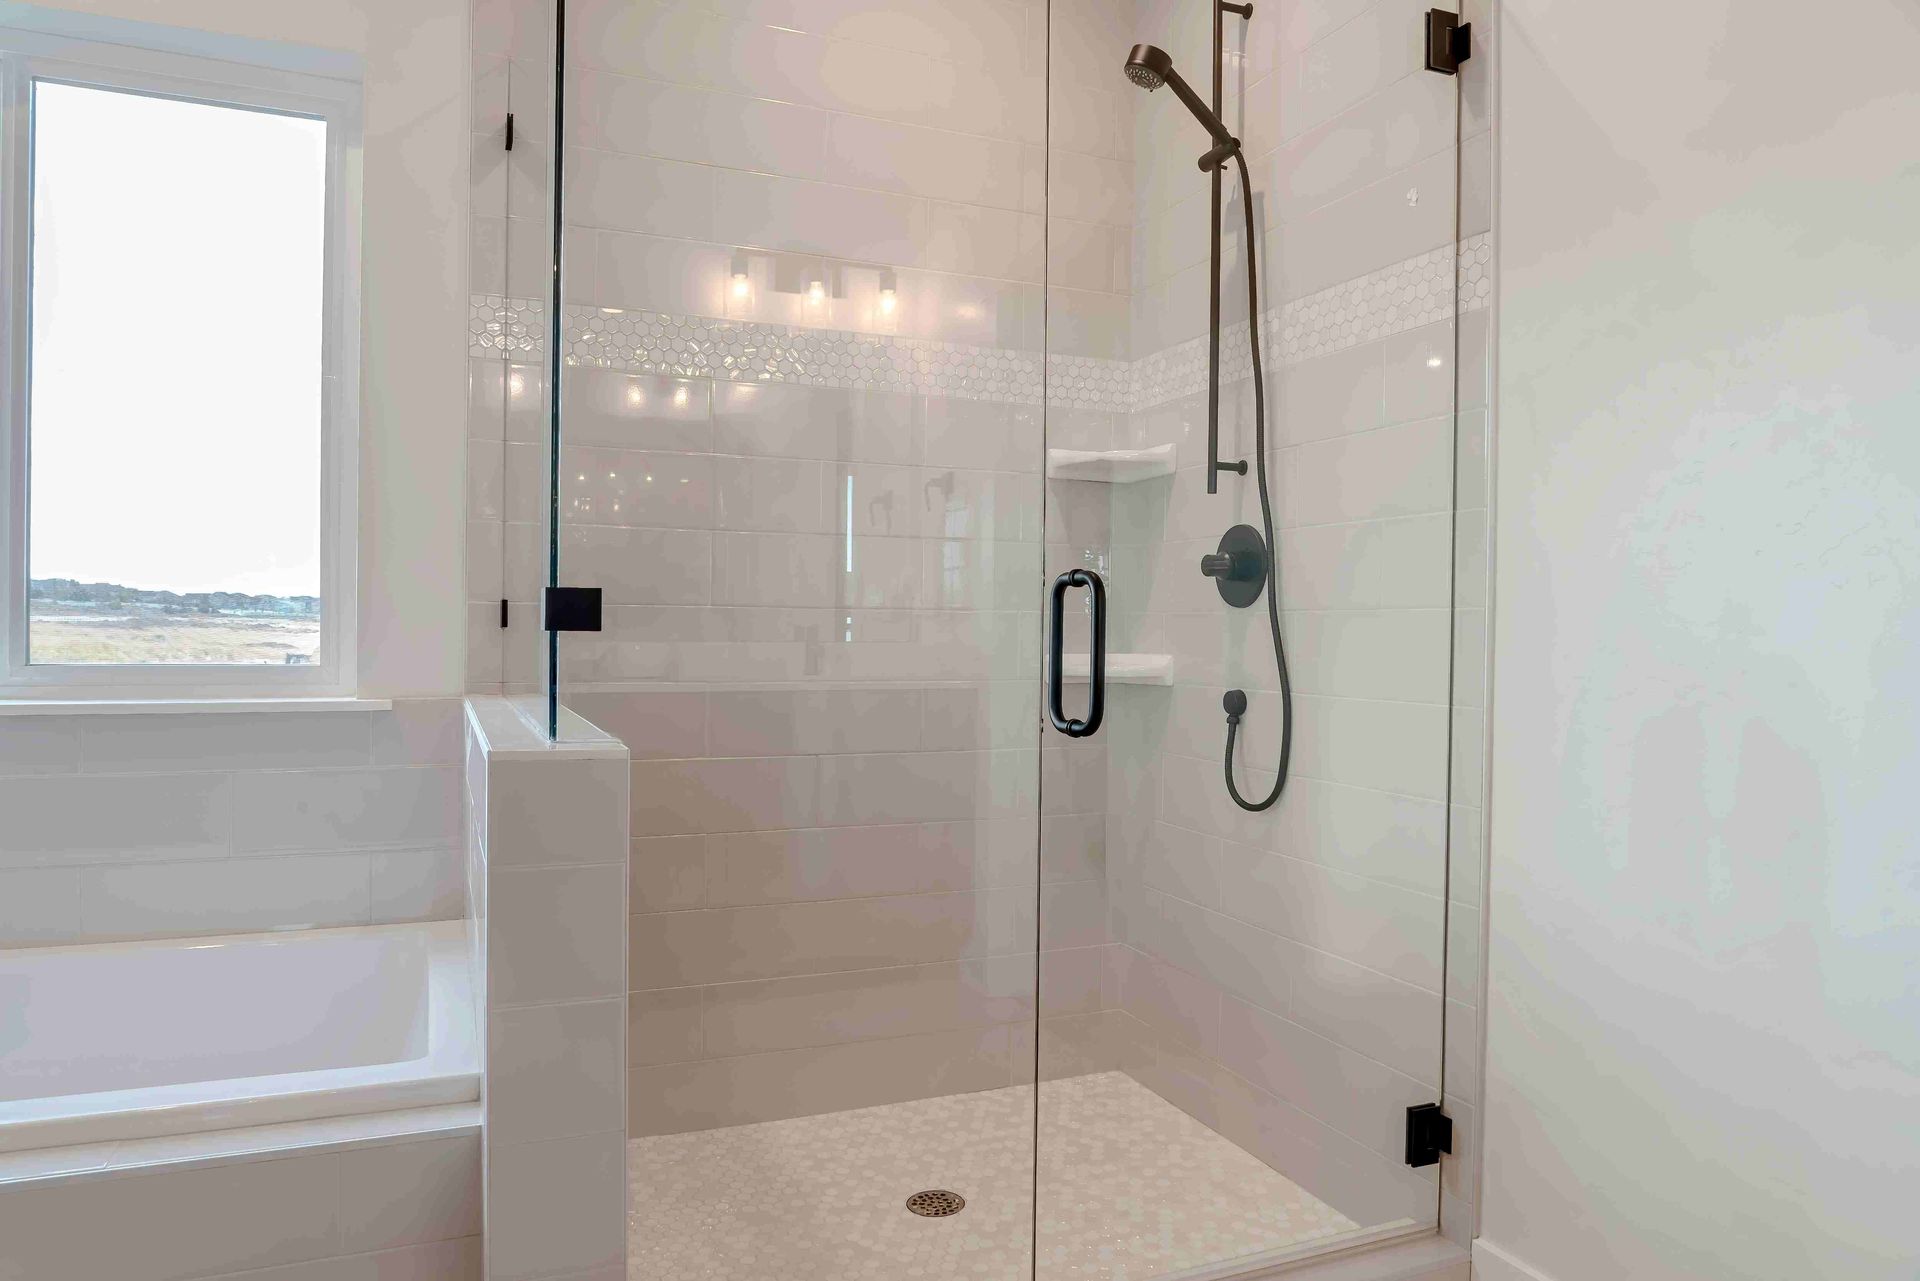 A new shower enclosure in bathroom